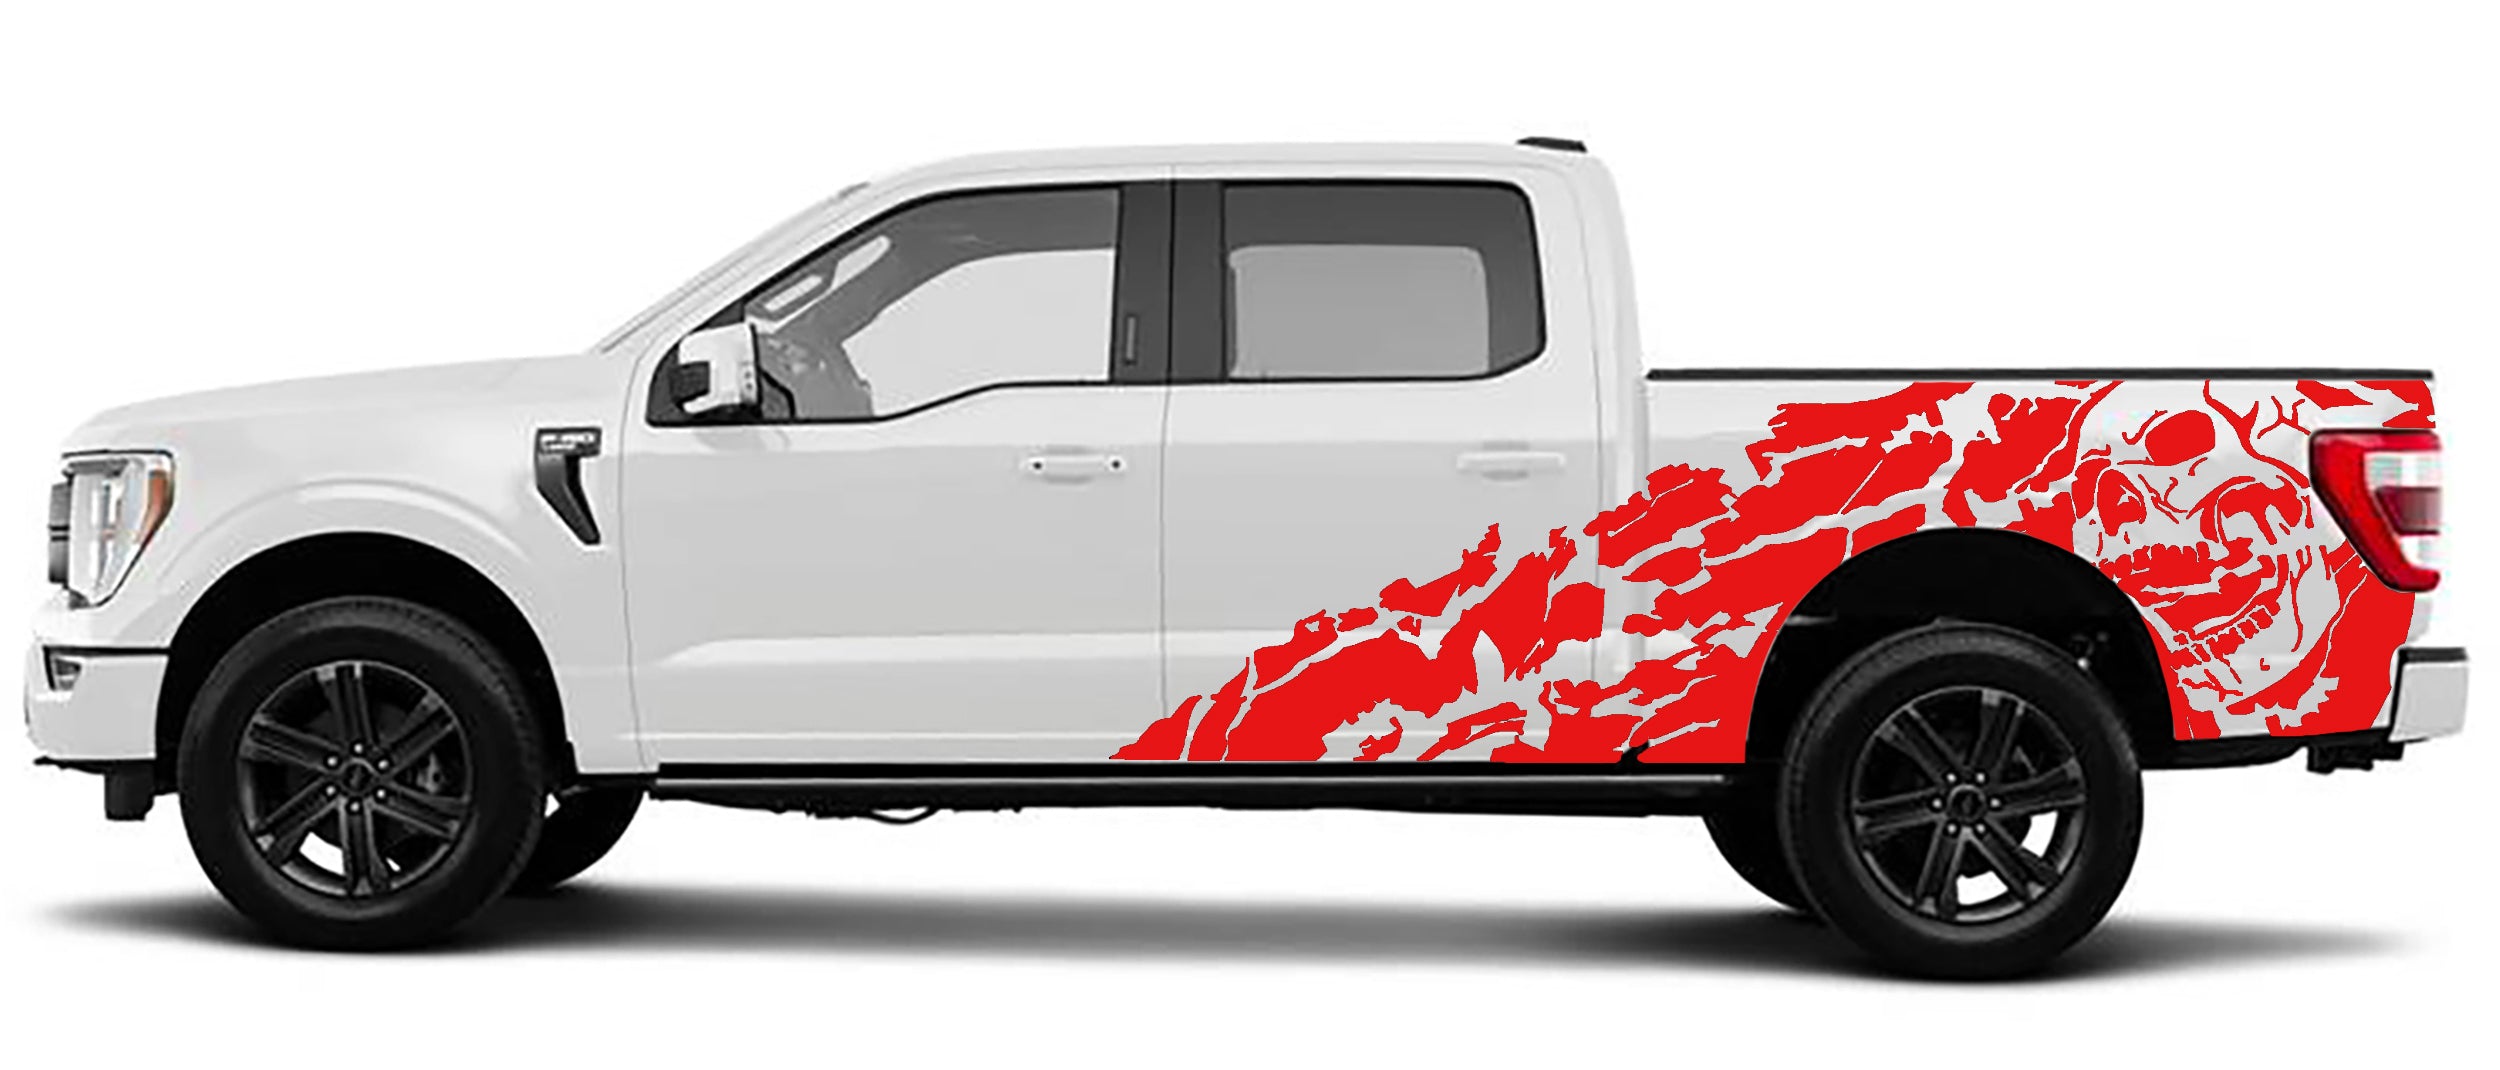 Nightmare side vinyl graphics for ford f 150 2021 to 2023 models red